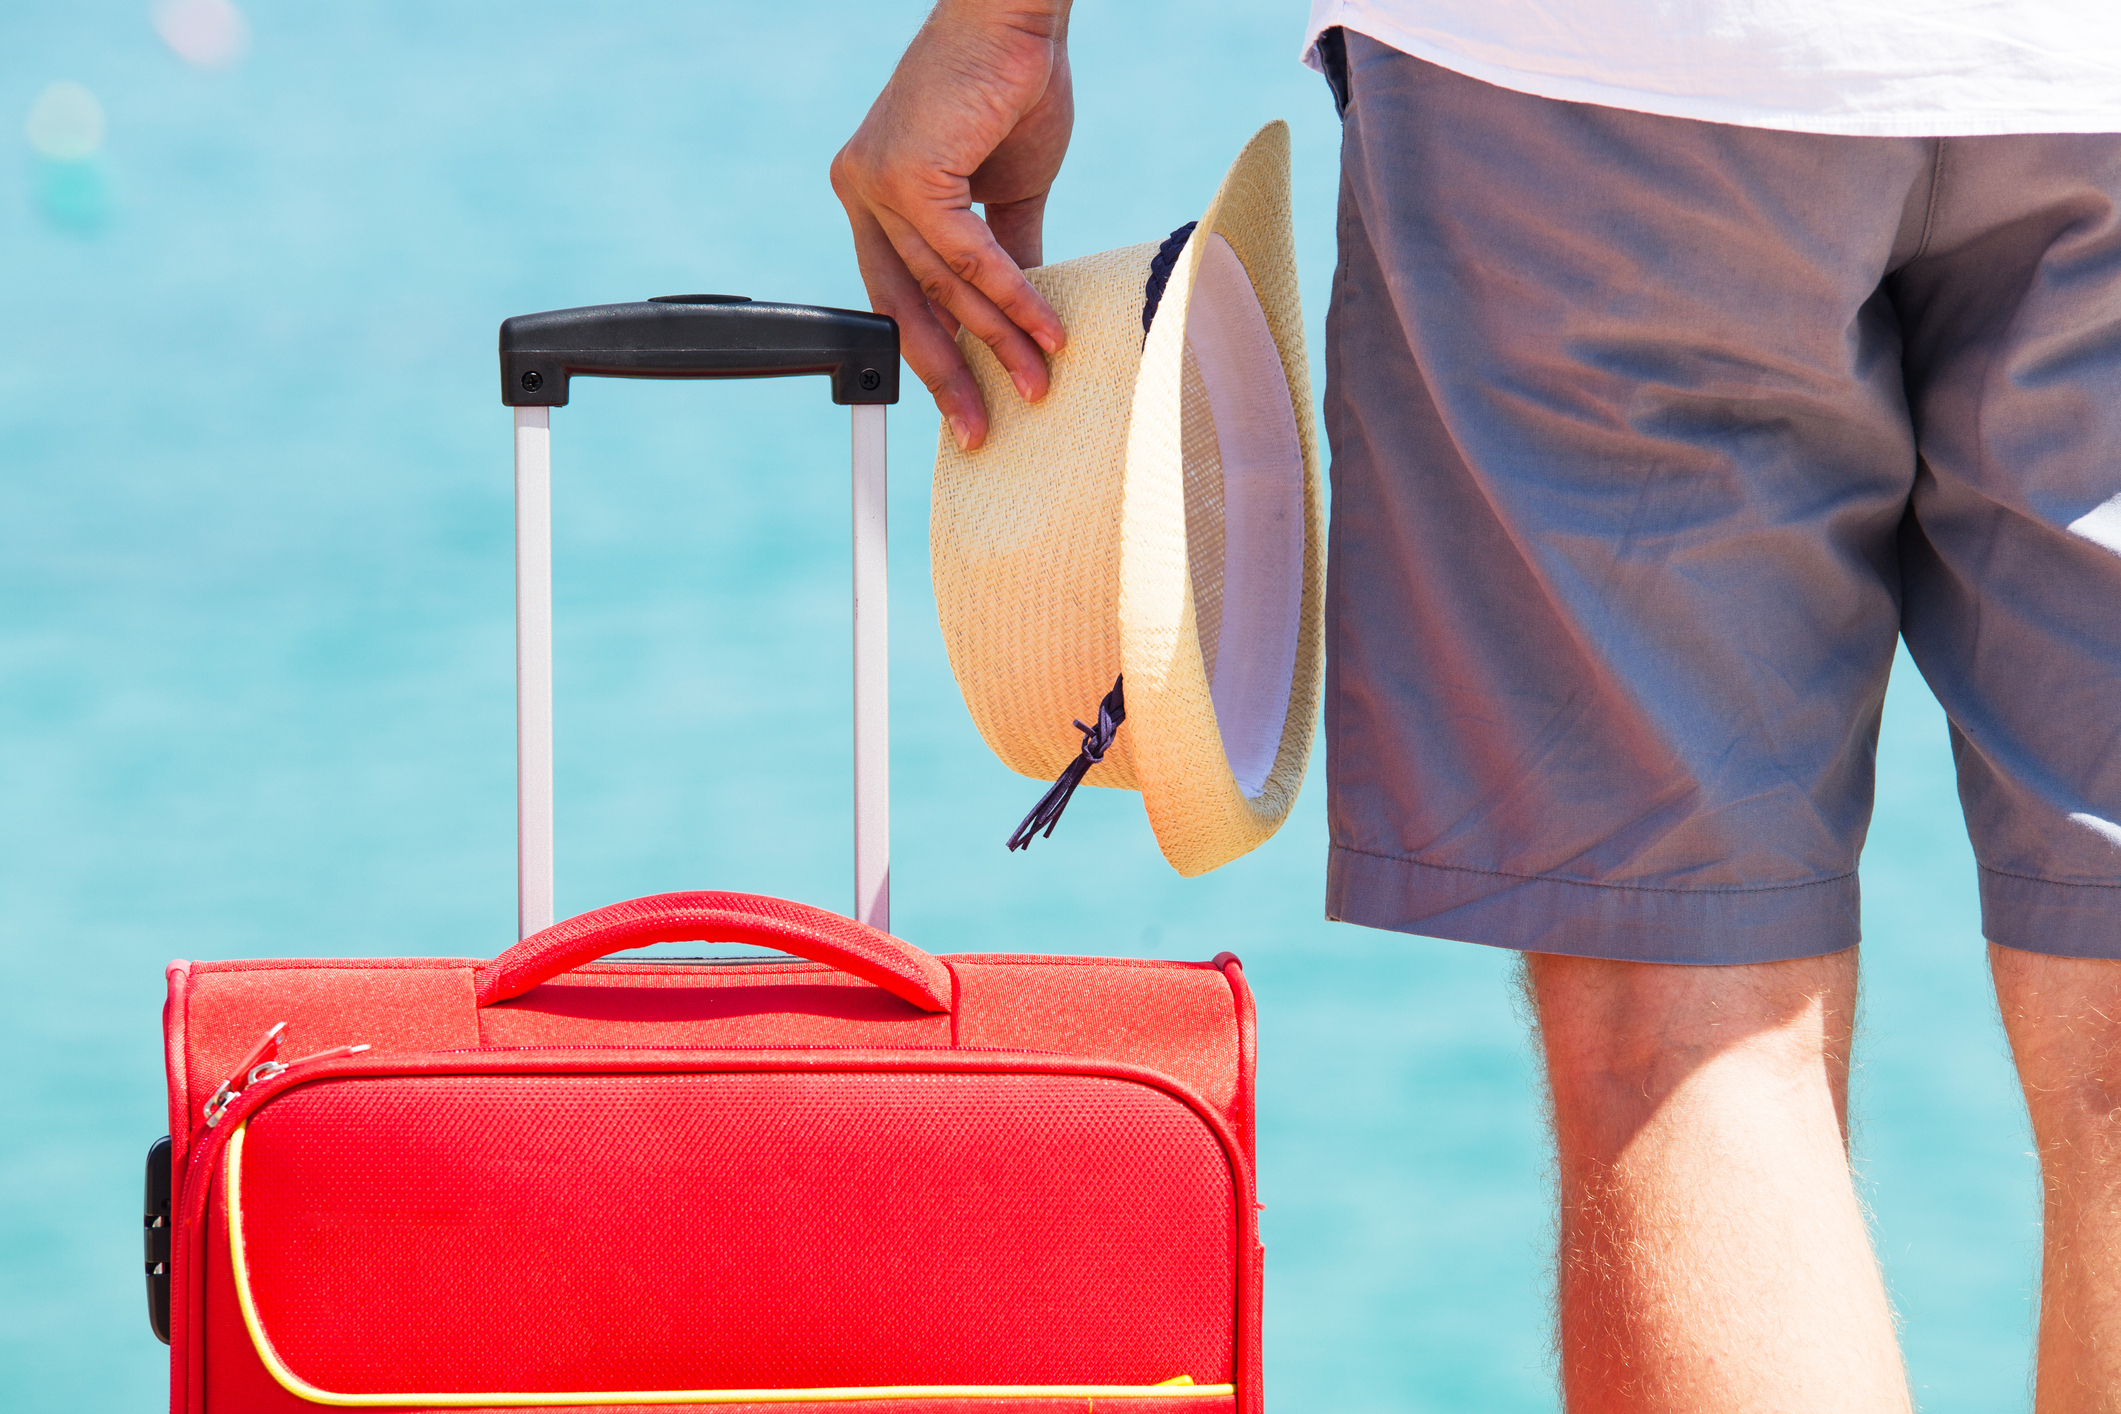 Travel or vacation background. Tropical resort destination scene. Tourist hand holding hat near red suitcase at the sea.